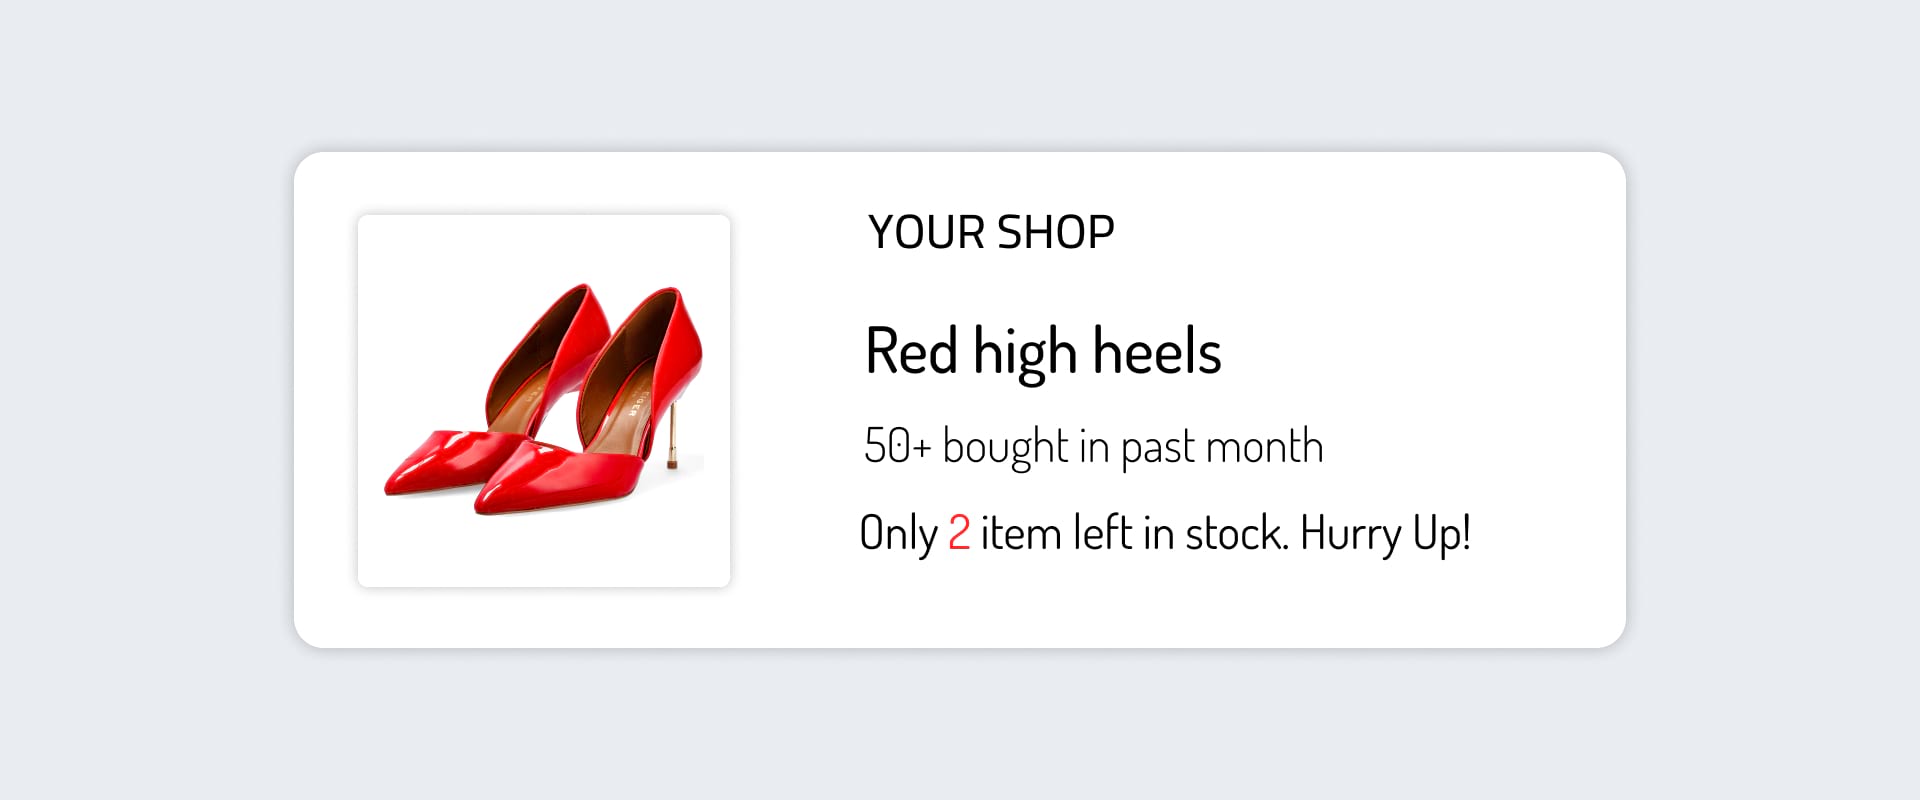 An illustration of the red heels product page with low-stock information